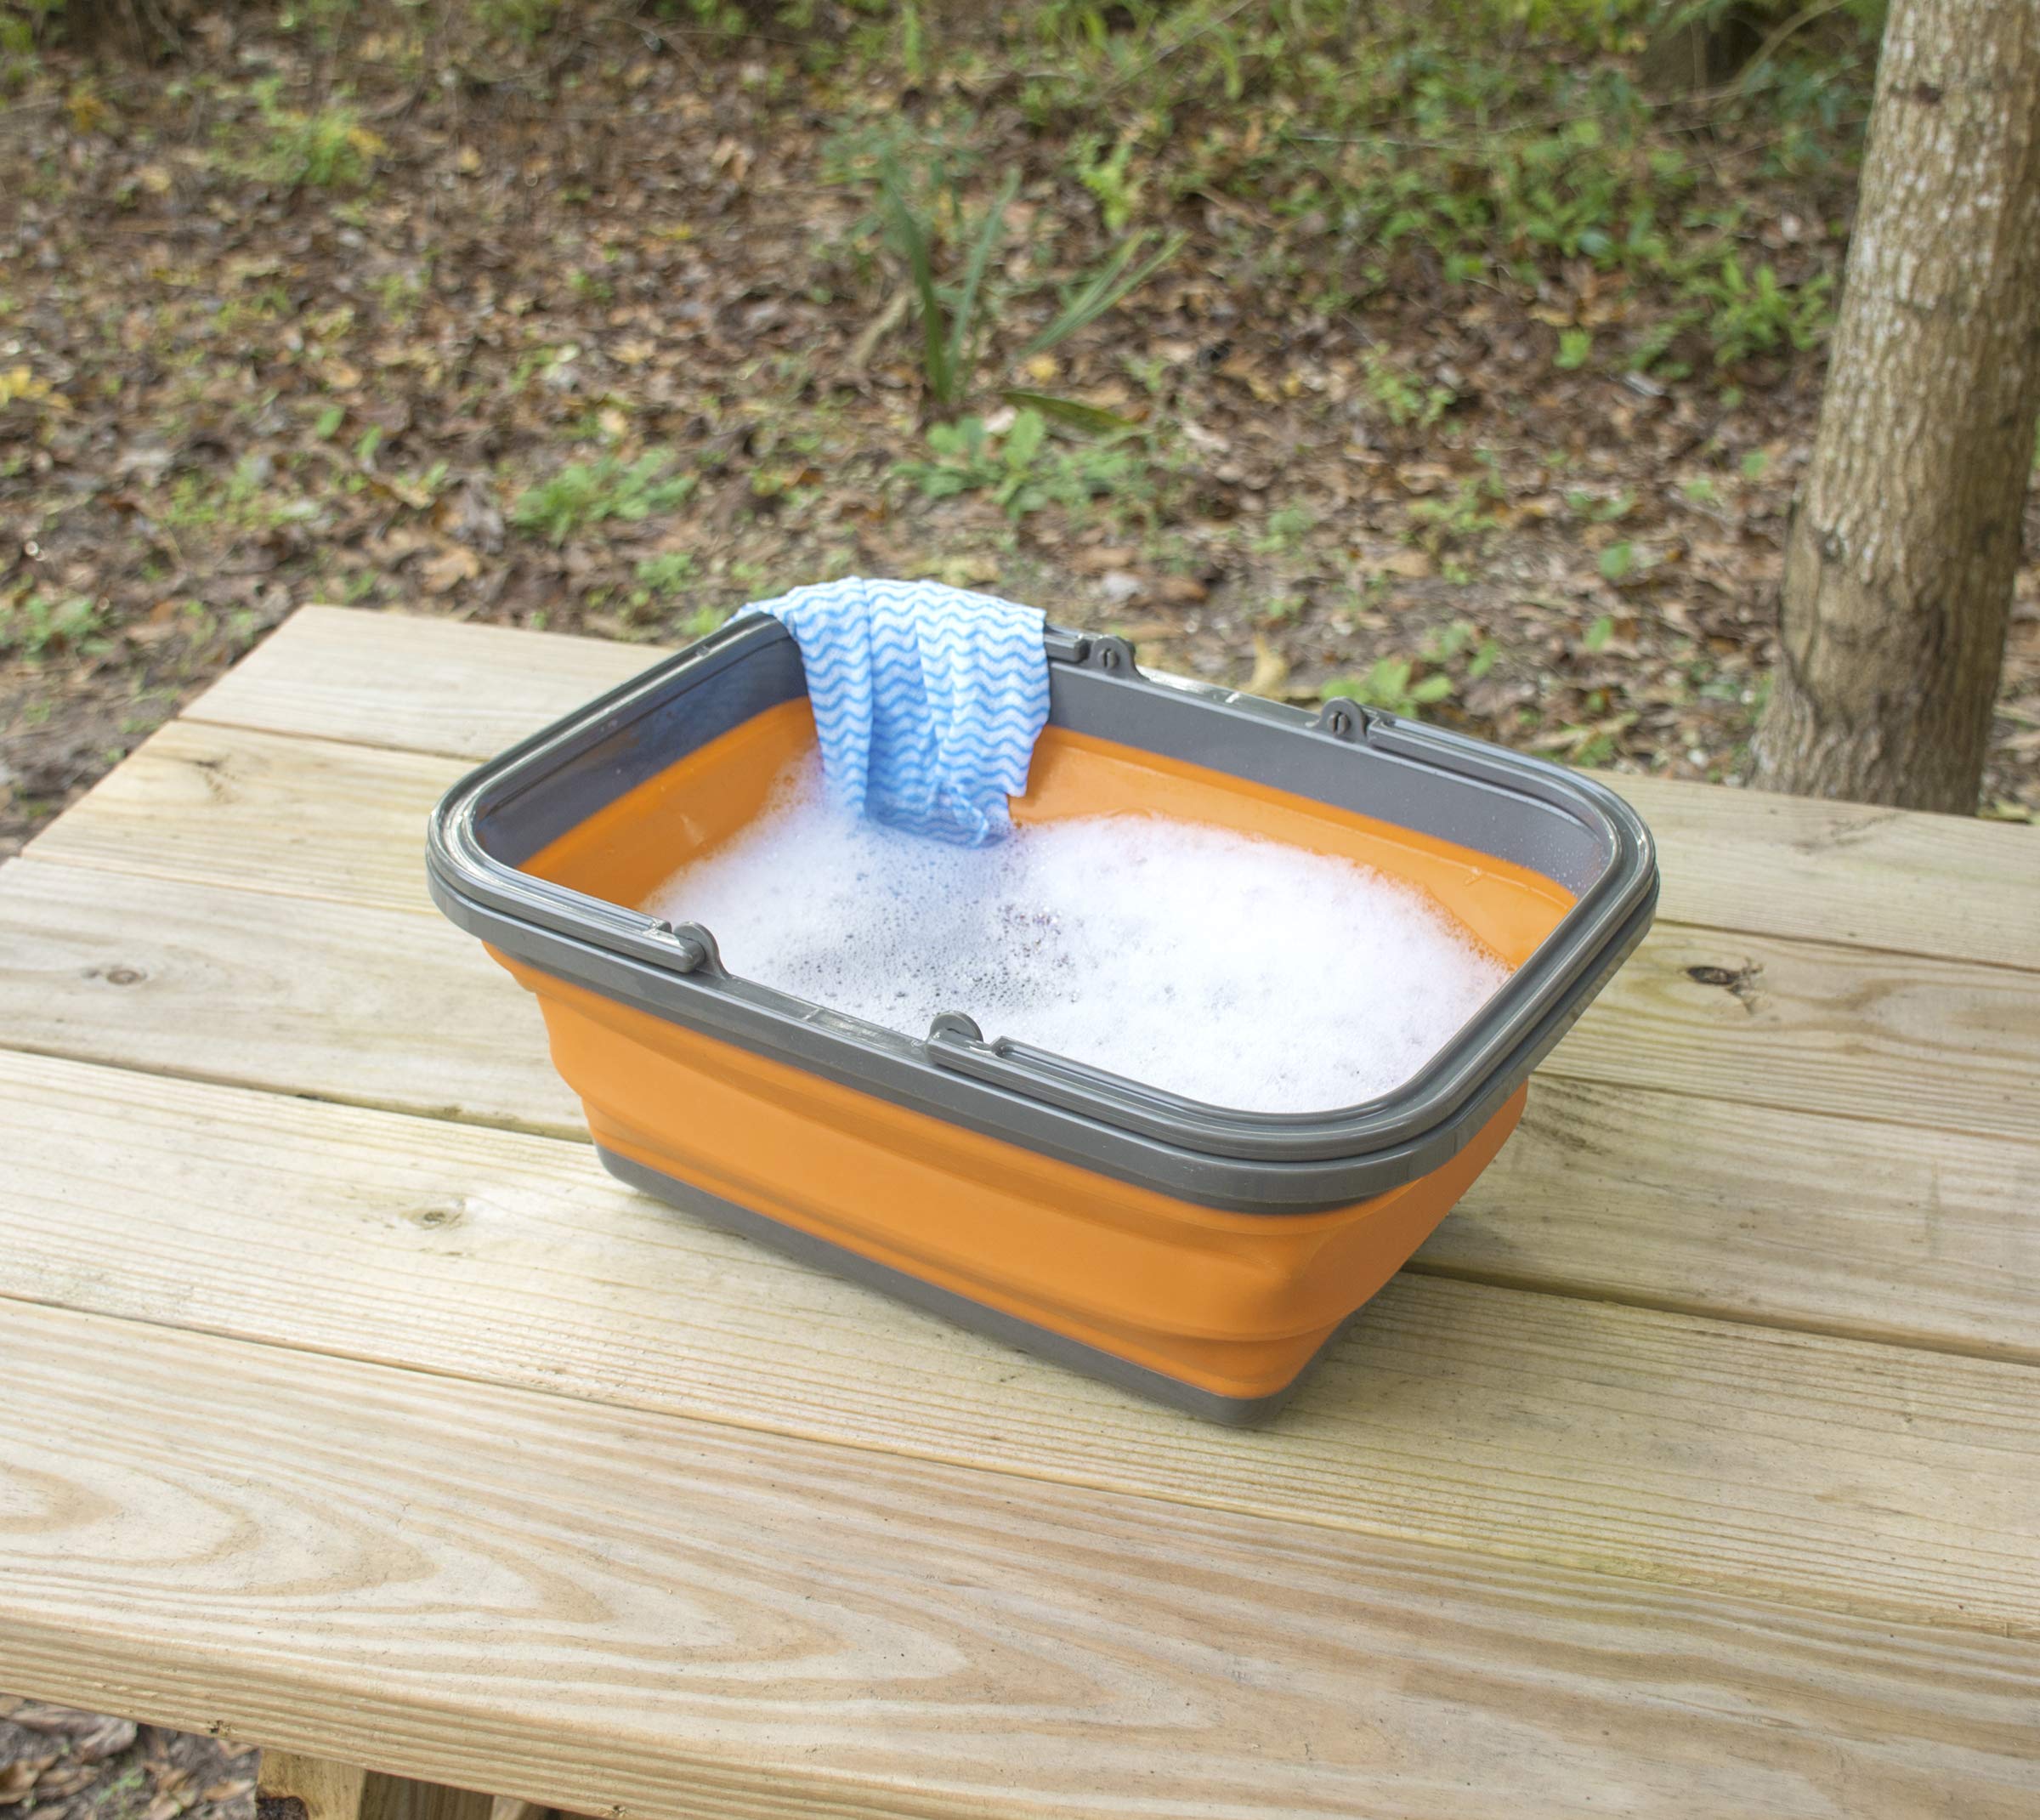 ust FlexWare Collapsible Sink with 2.25 Gal Wash Basin for Washing Dishes and Person During Camping, Hiking and Home, Orange, One Size (20-02735)